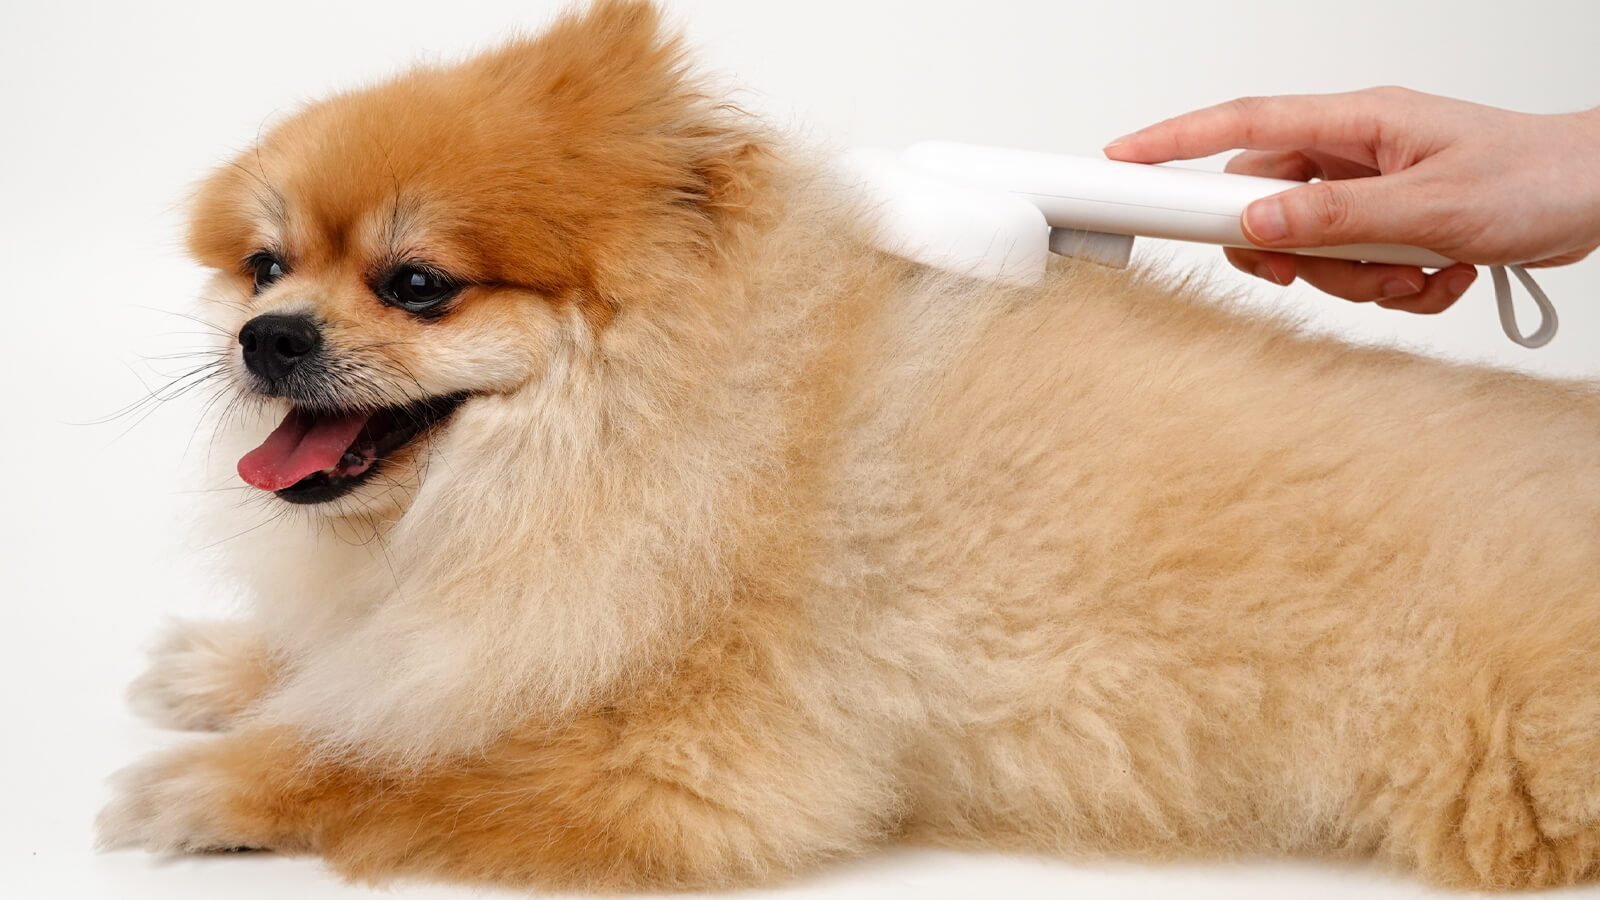 Self-Cleaning Brush use with dog